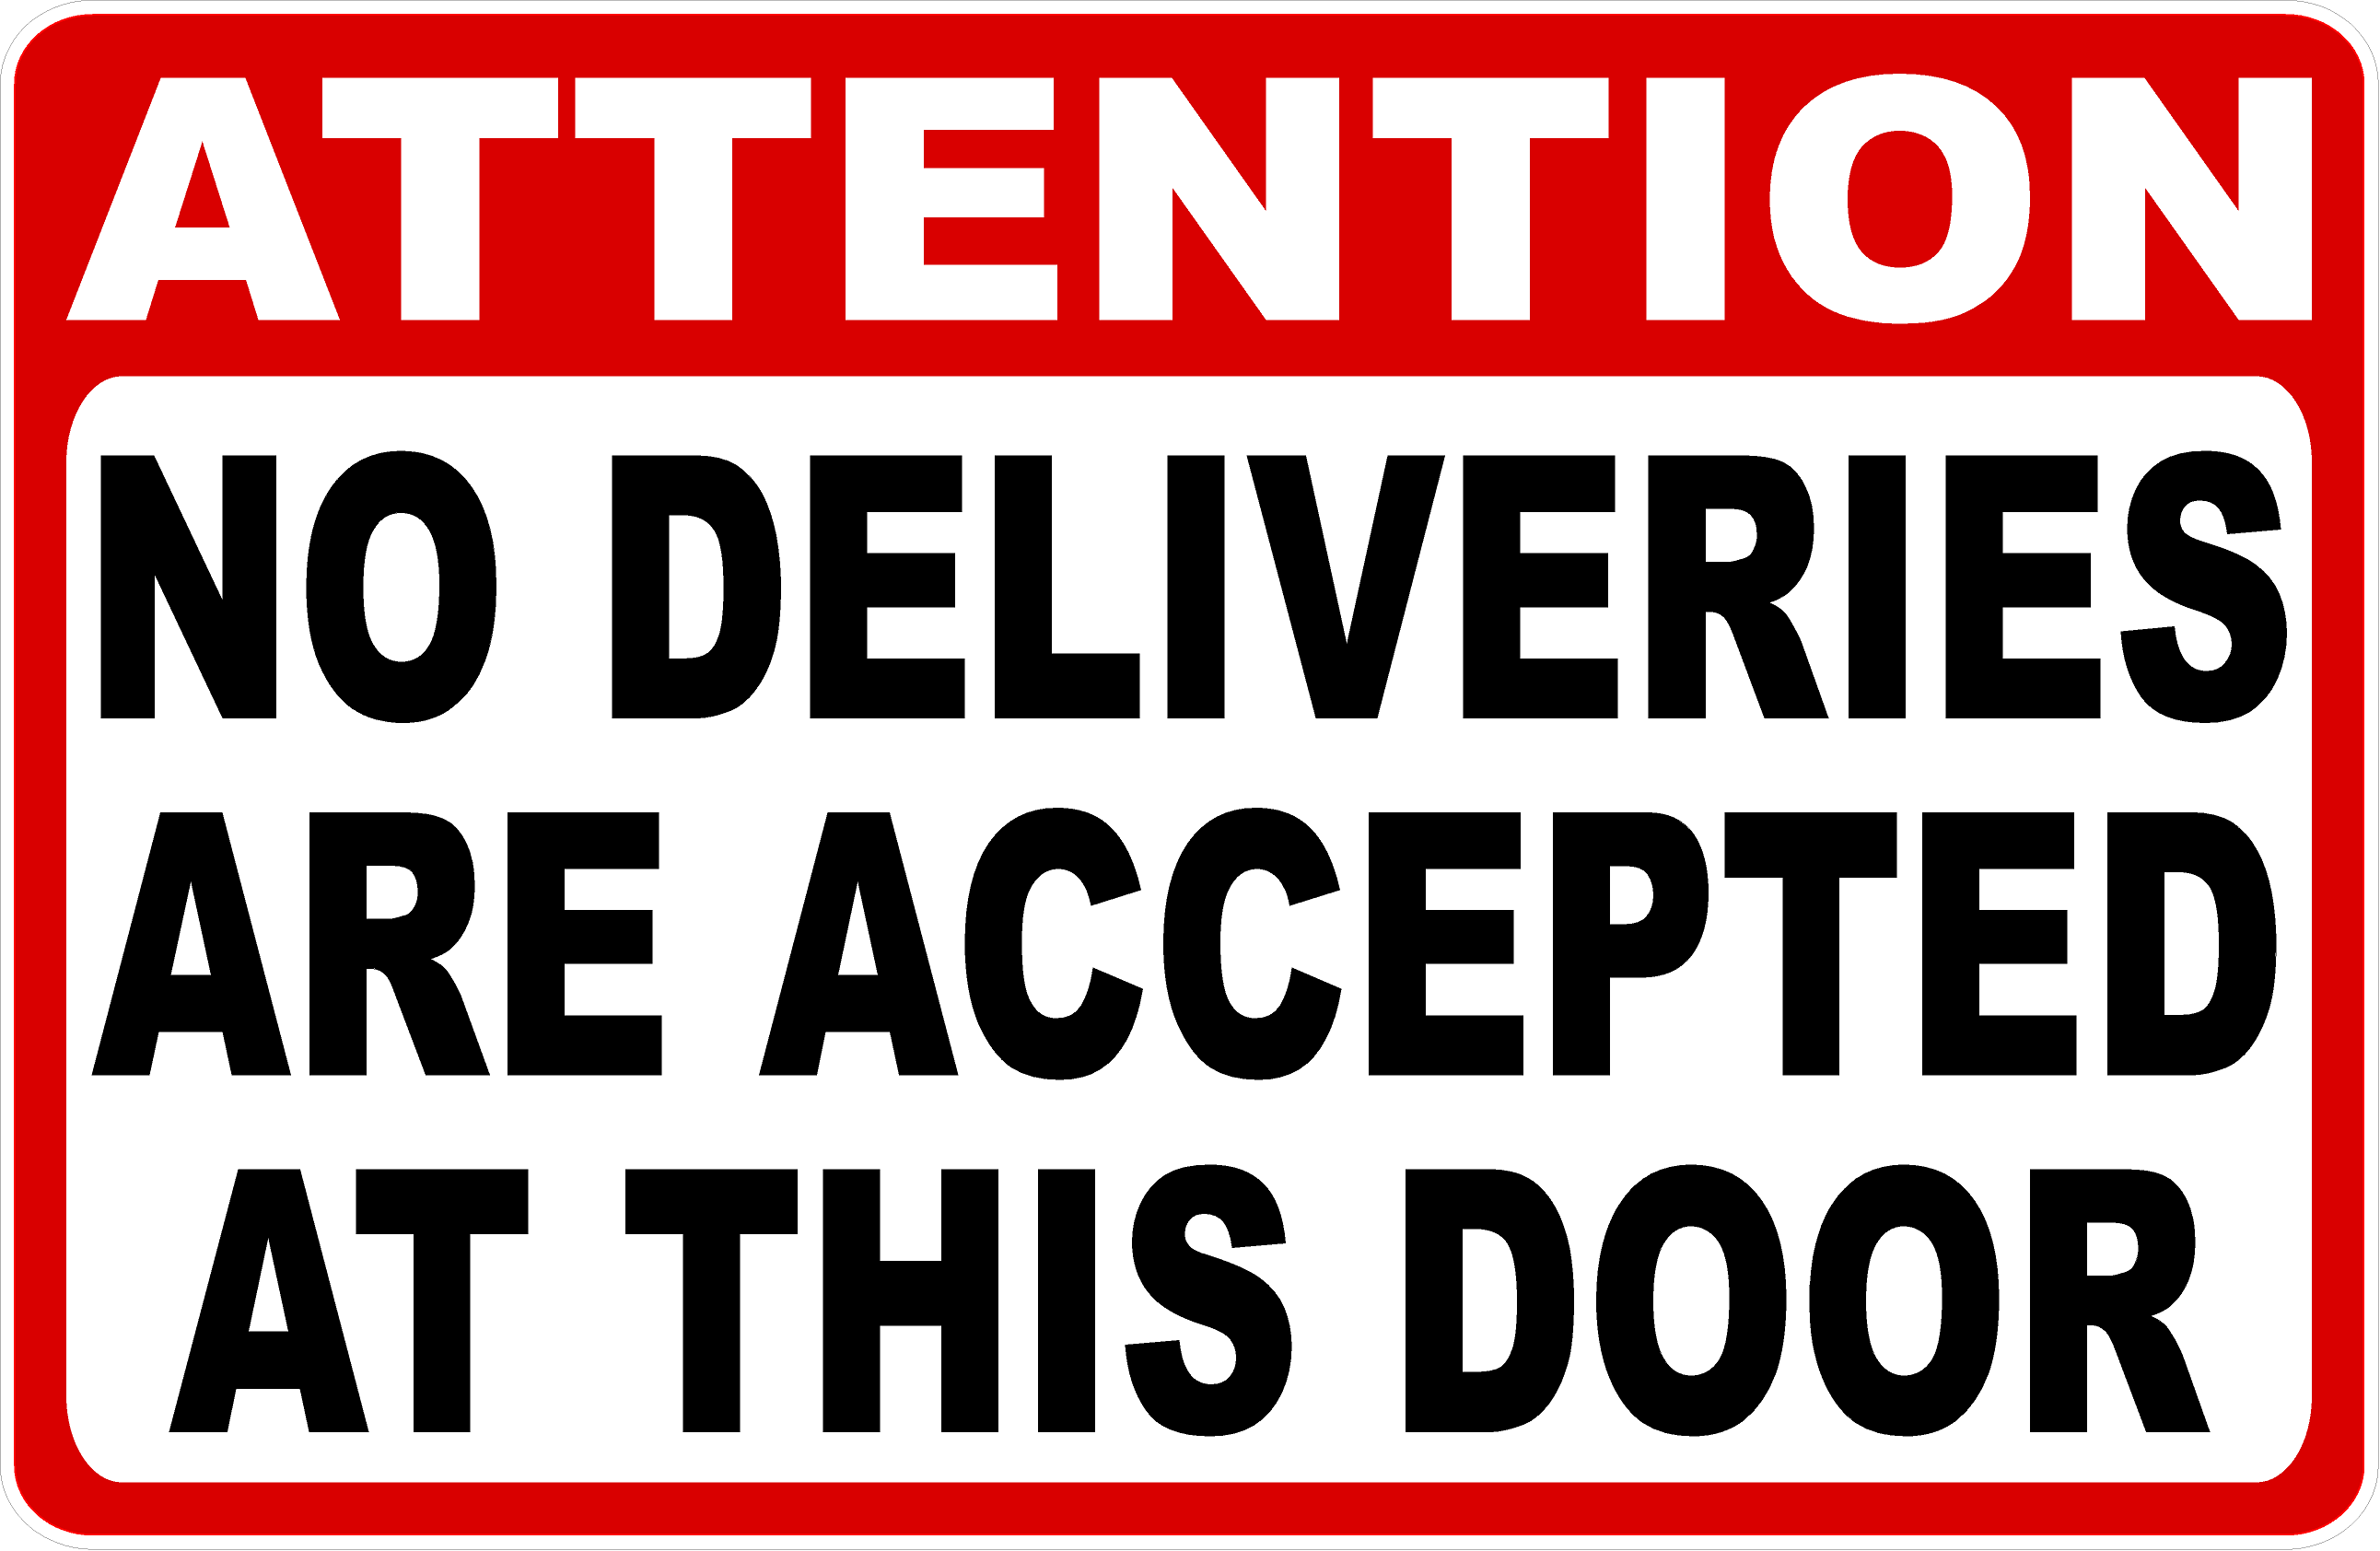 Attention No Deliveries Accepted At This Door Sign – Signs by SalaGraphics